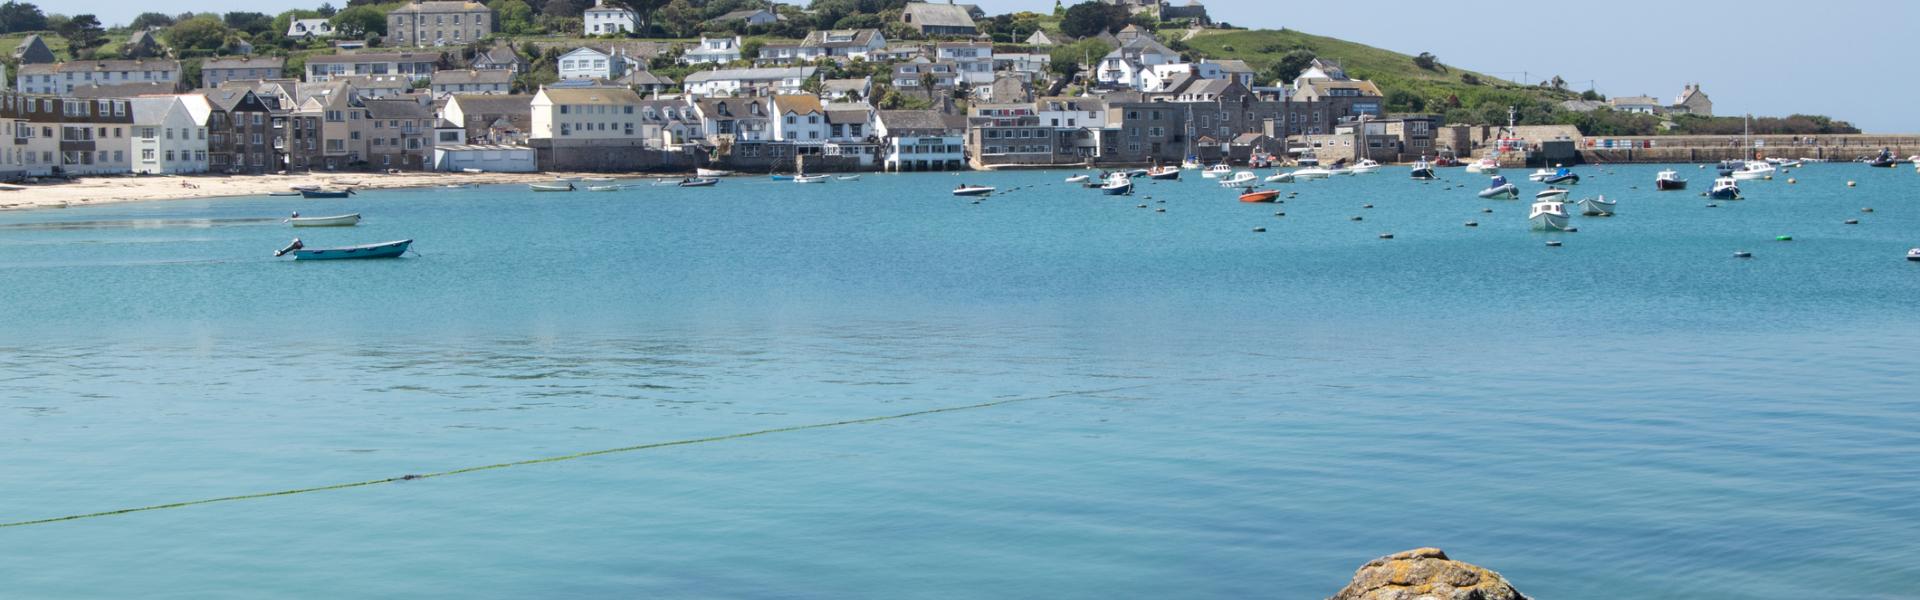 Holiday Cottages & Accommodation in Isles of Scilly - HomeToGo